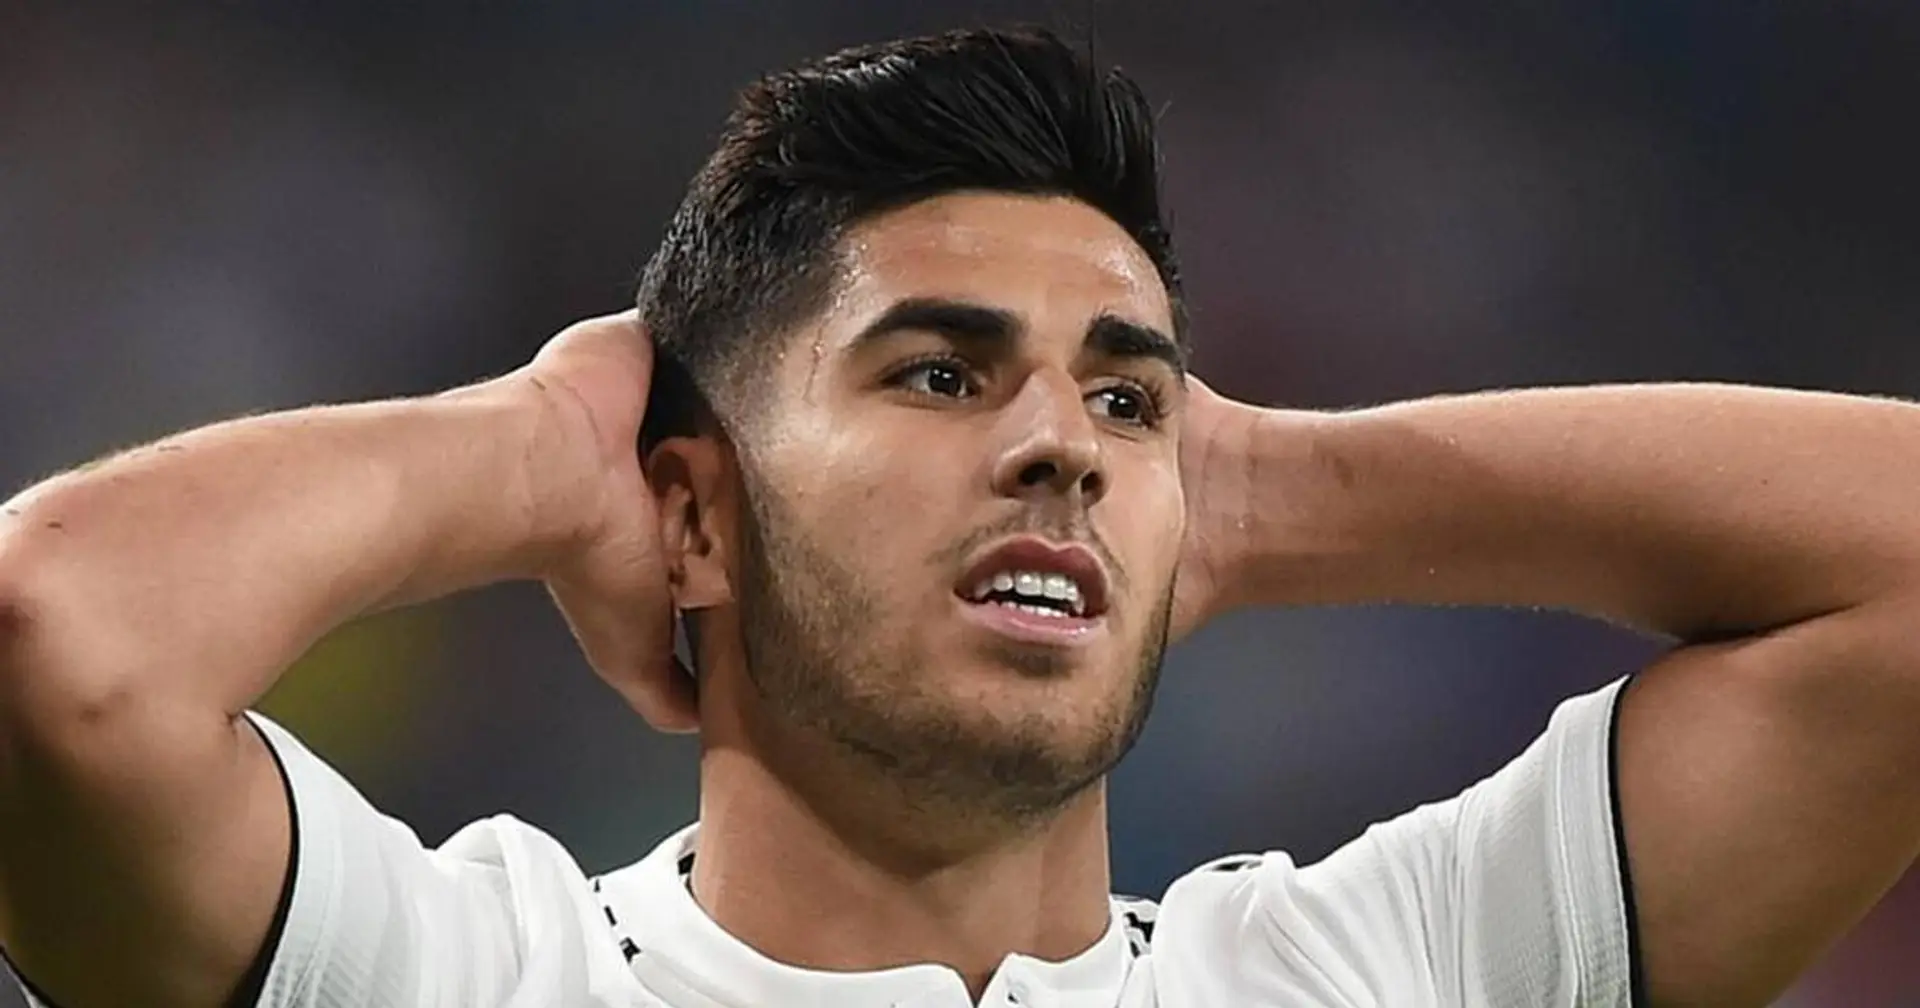 'One lethargic performance after another': fan shares his concerns over Marco Asensio's protracted dip in form